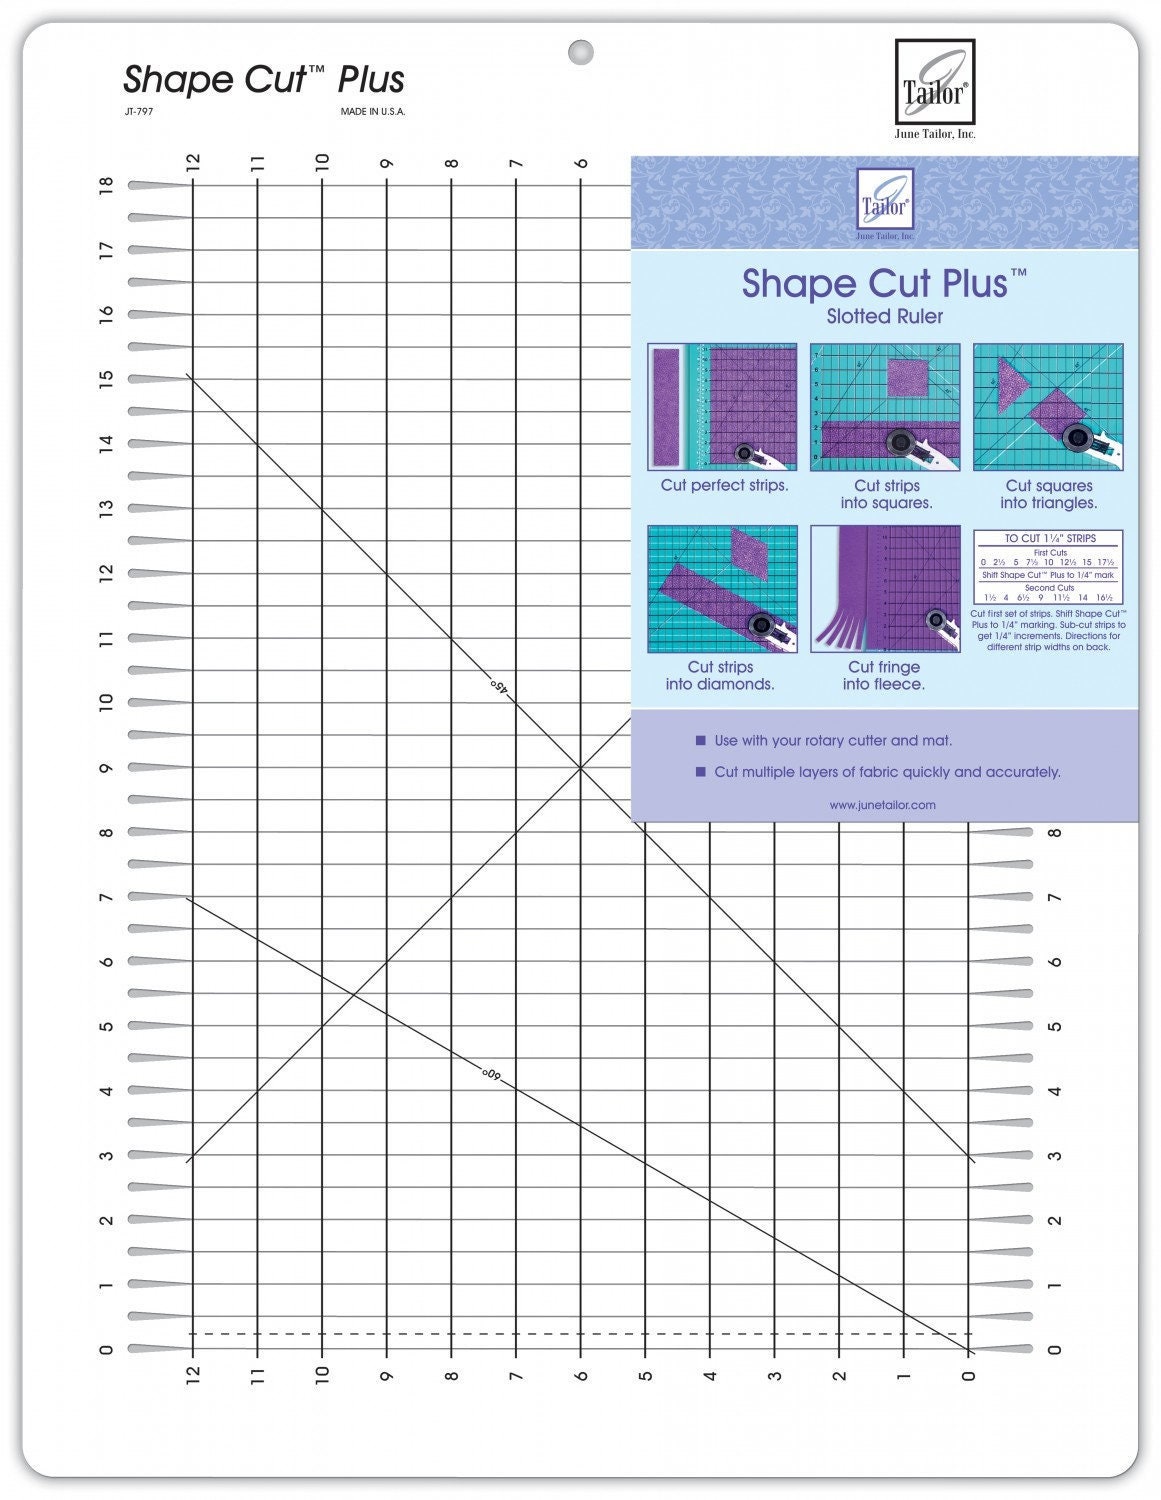 Charming Shape Cut by June Tailor Inc 730976017374 Rulers & Templates